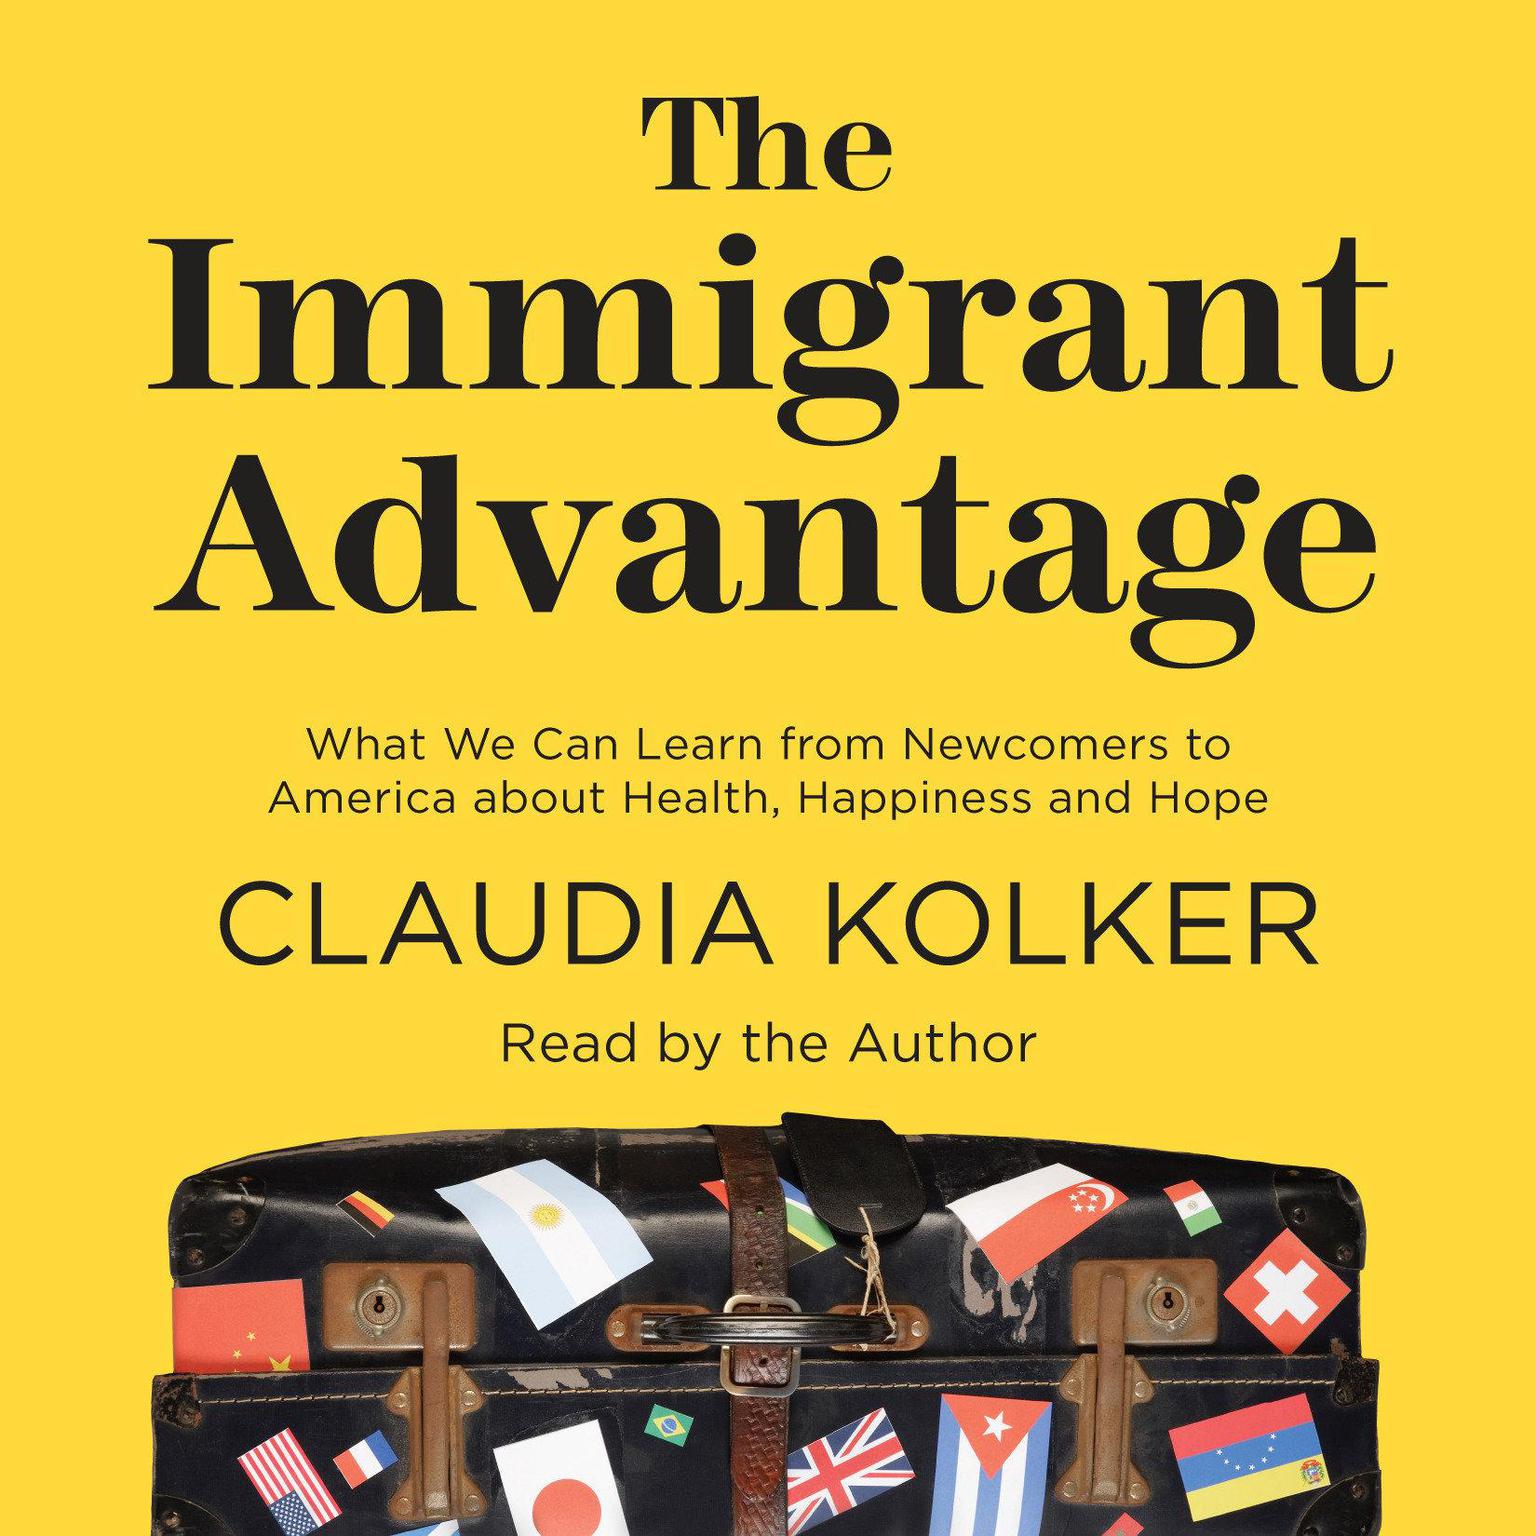 The Immigrant Advantage: What We Can Learn from Newcomers to America about Health, Happiness and Hope Audiobook, by Claudia Kolker